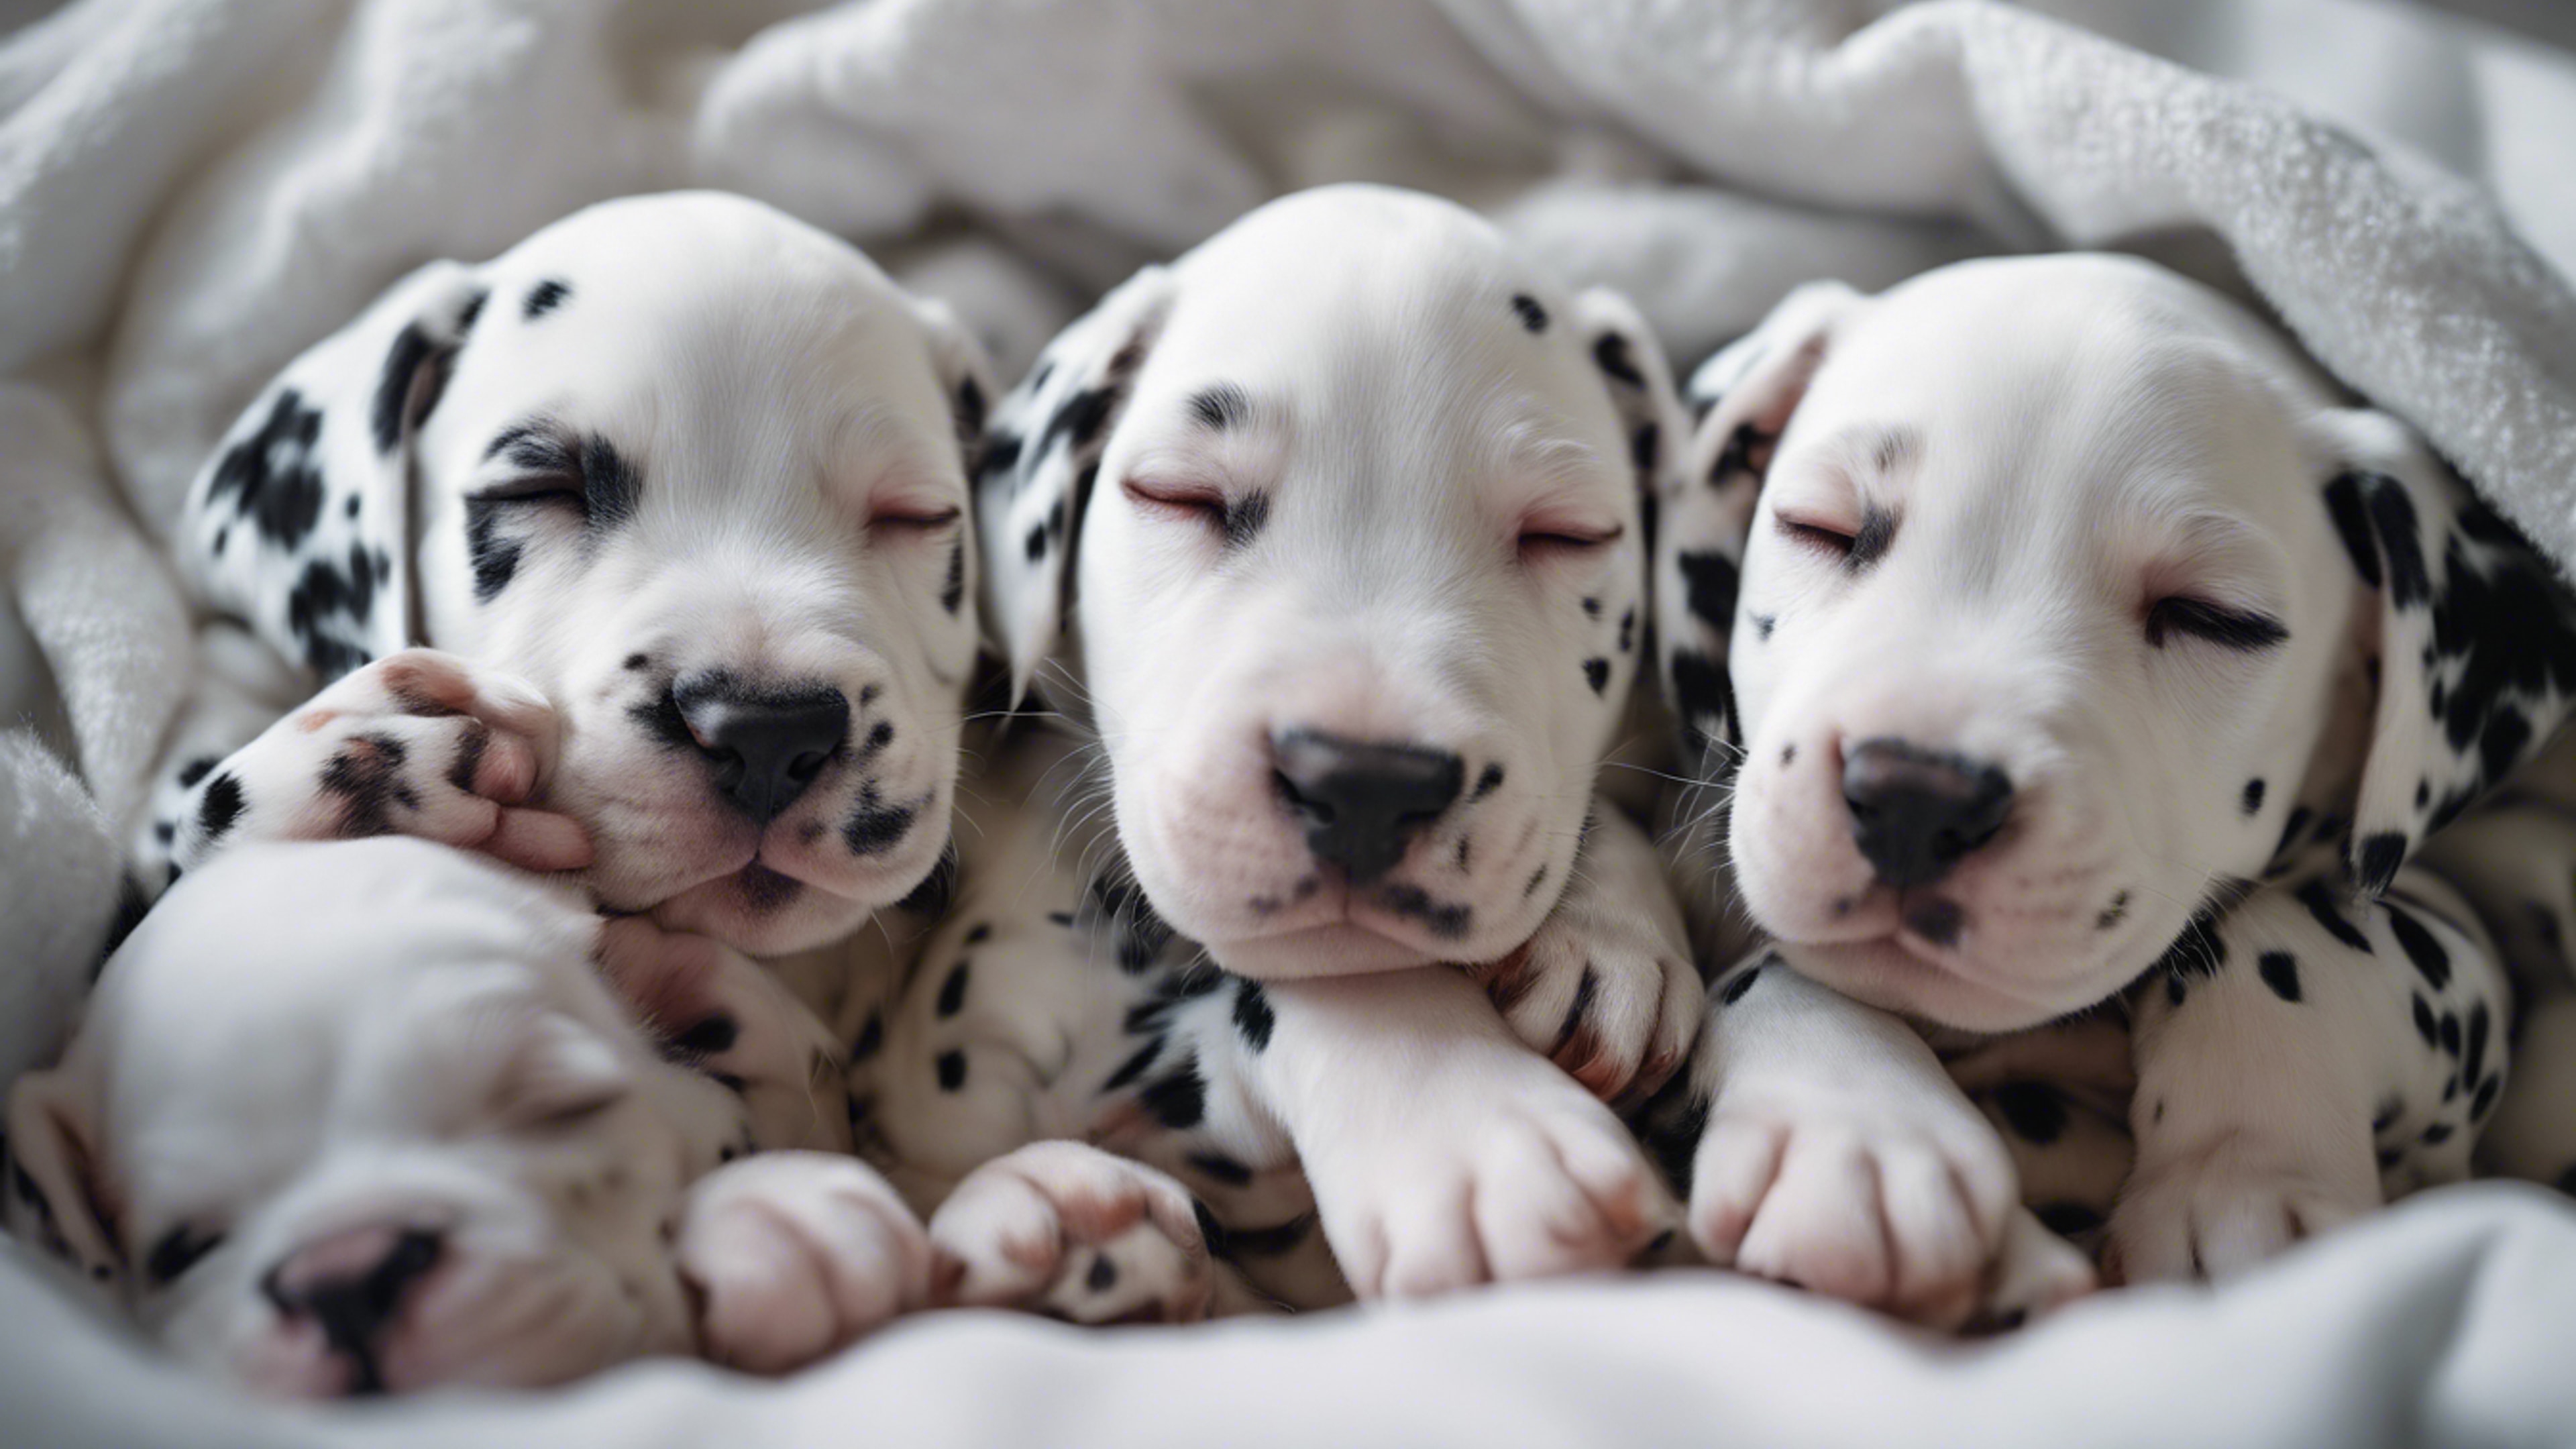 A cluster of sleeping Dalmatian puppies under a cozy white blanket in a nursery room. Tapetai[4a5dc312c1f344509ca9]